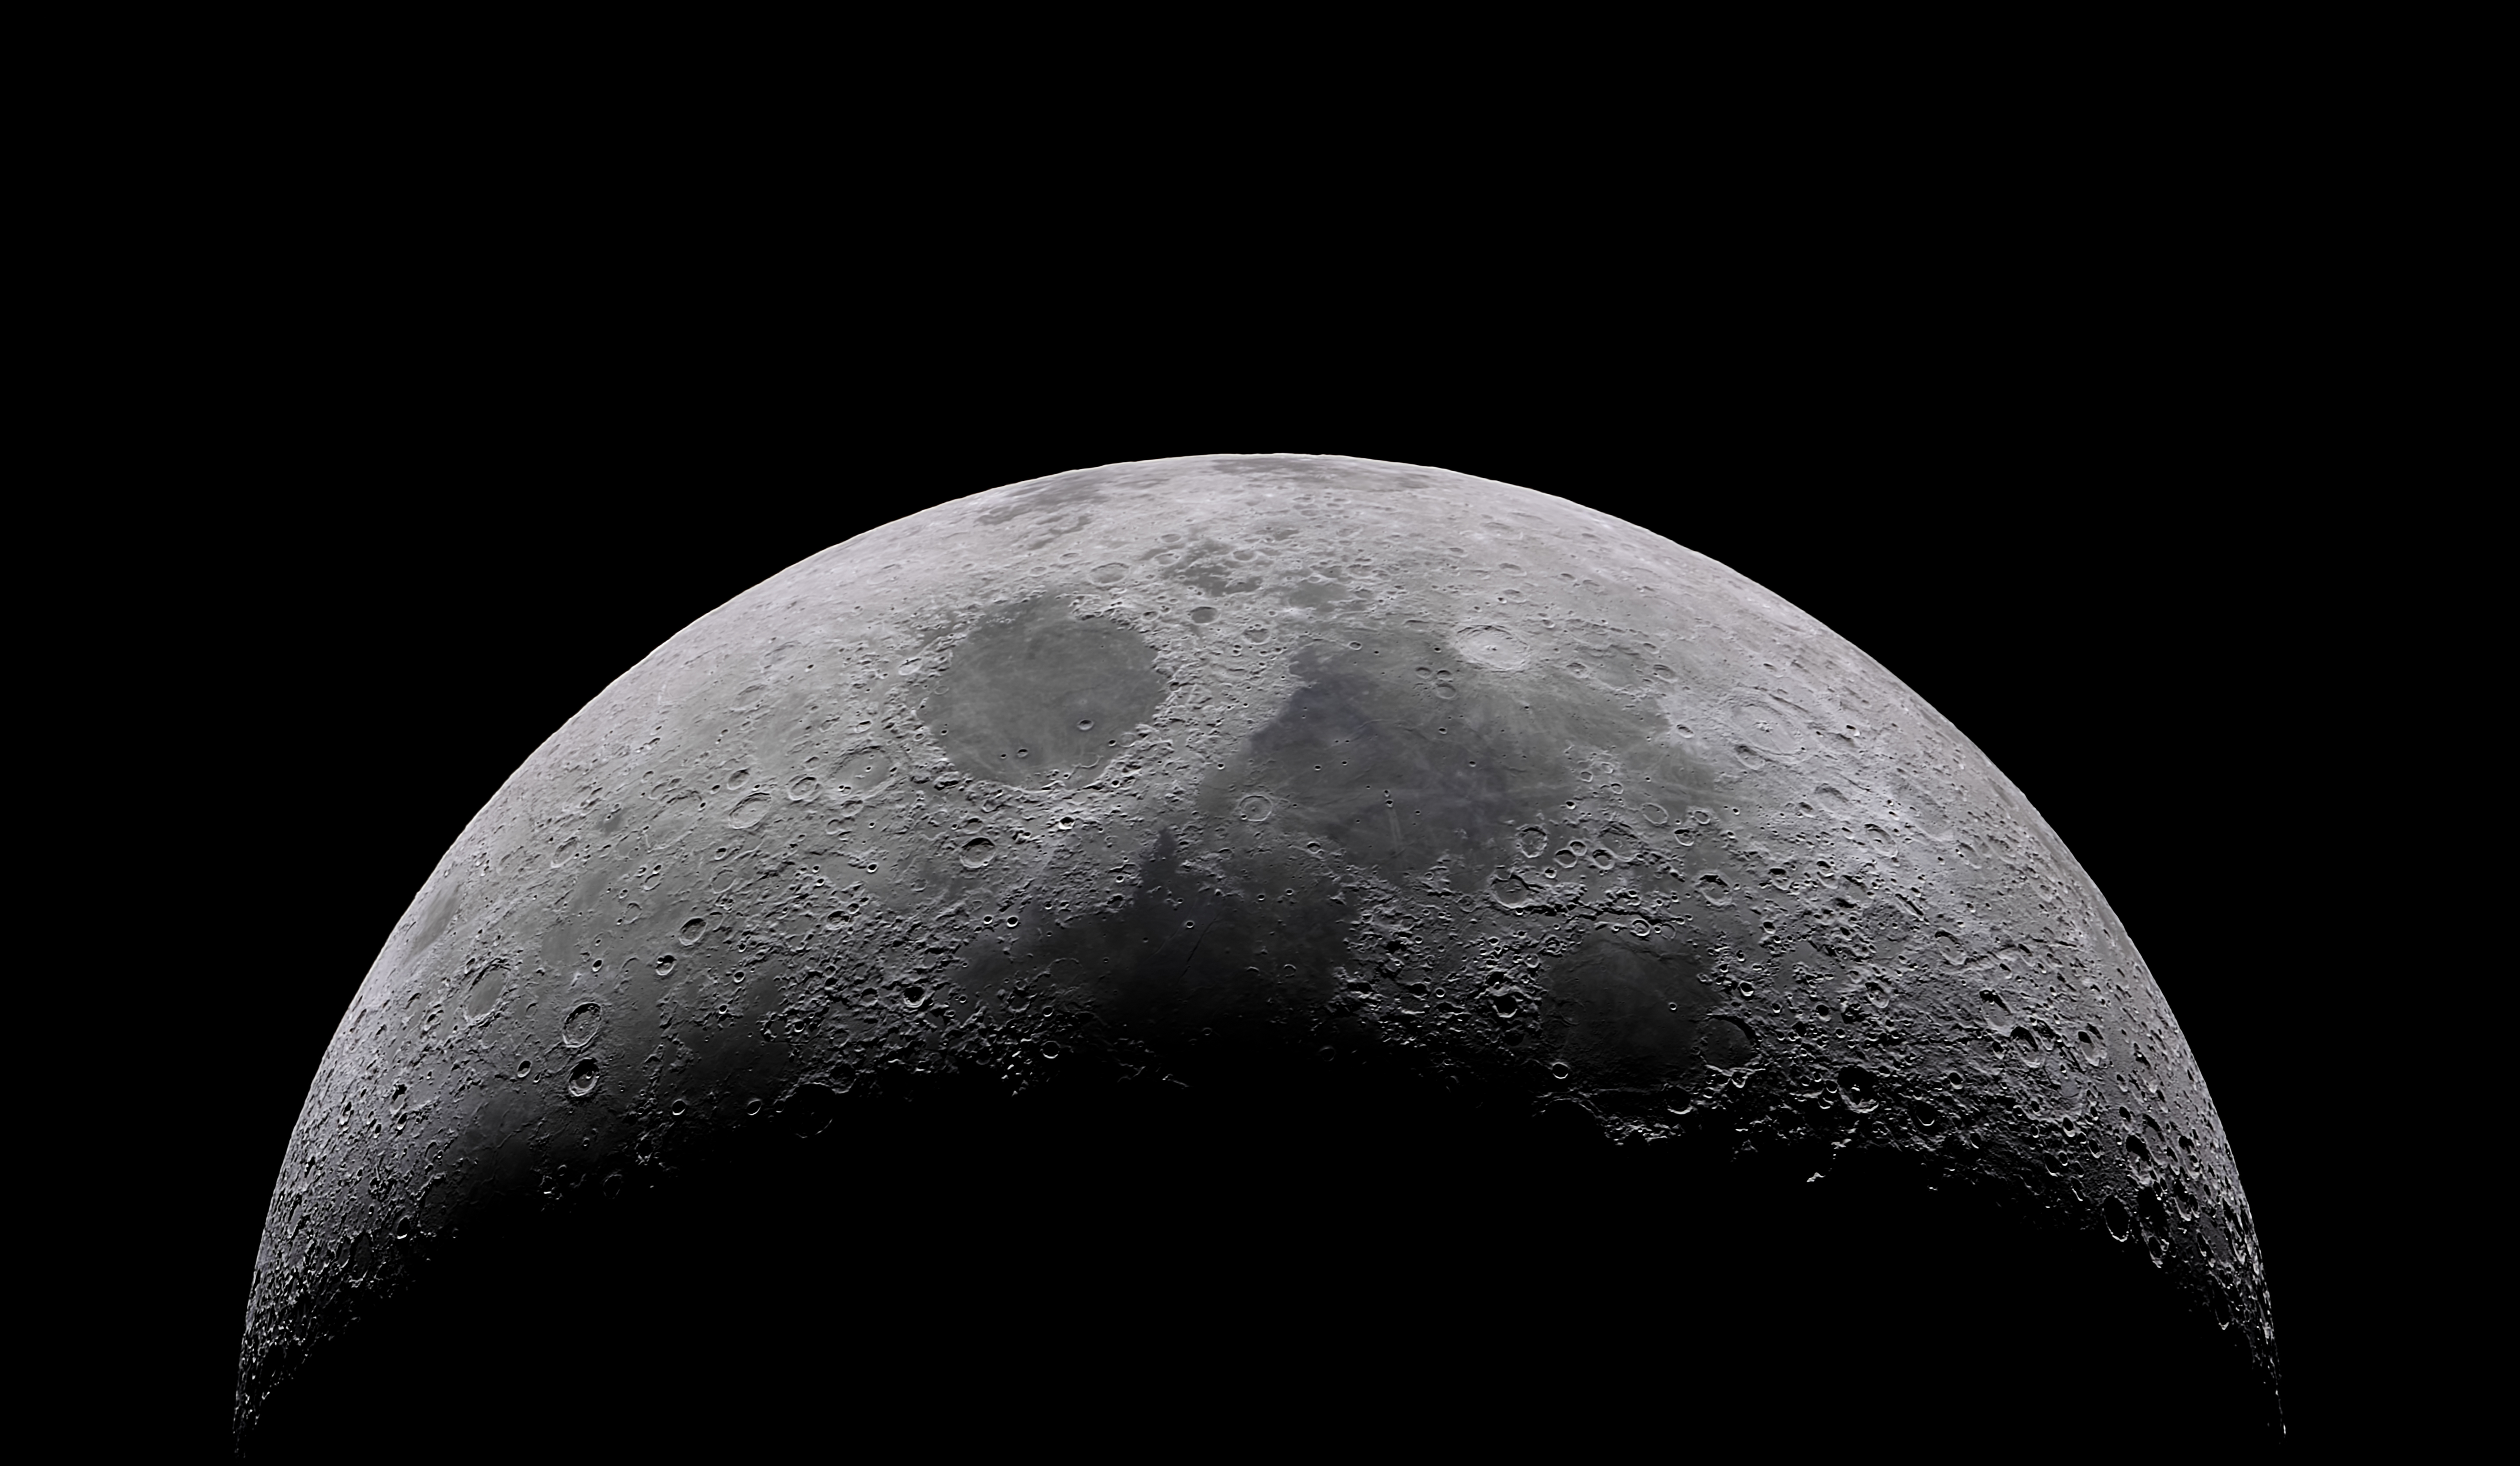 Lunar spacecraft could be causing "moonquakes"